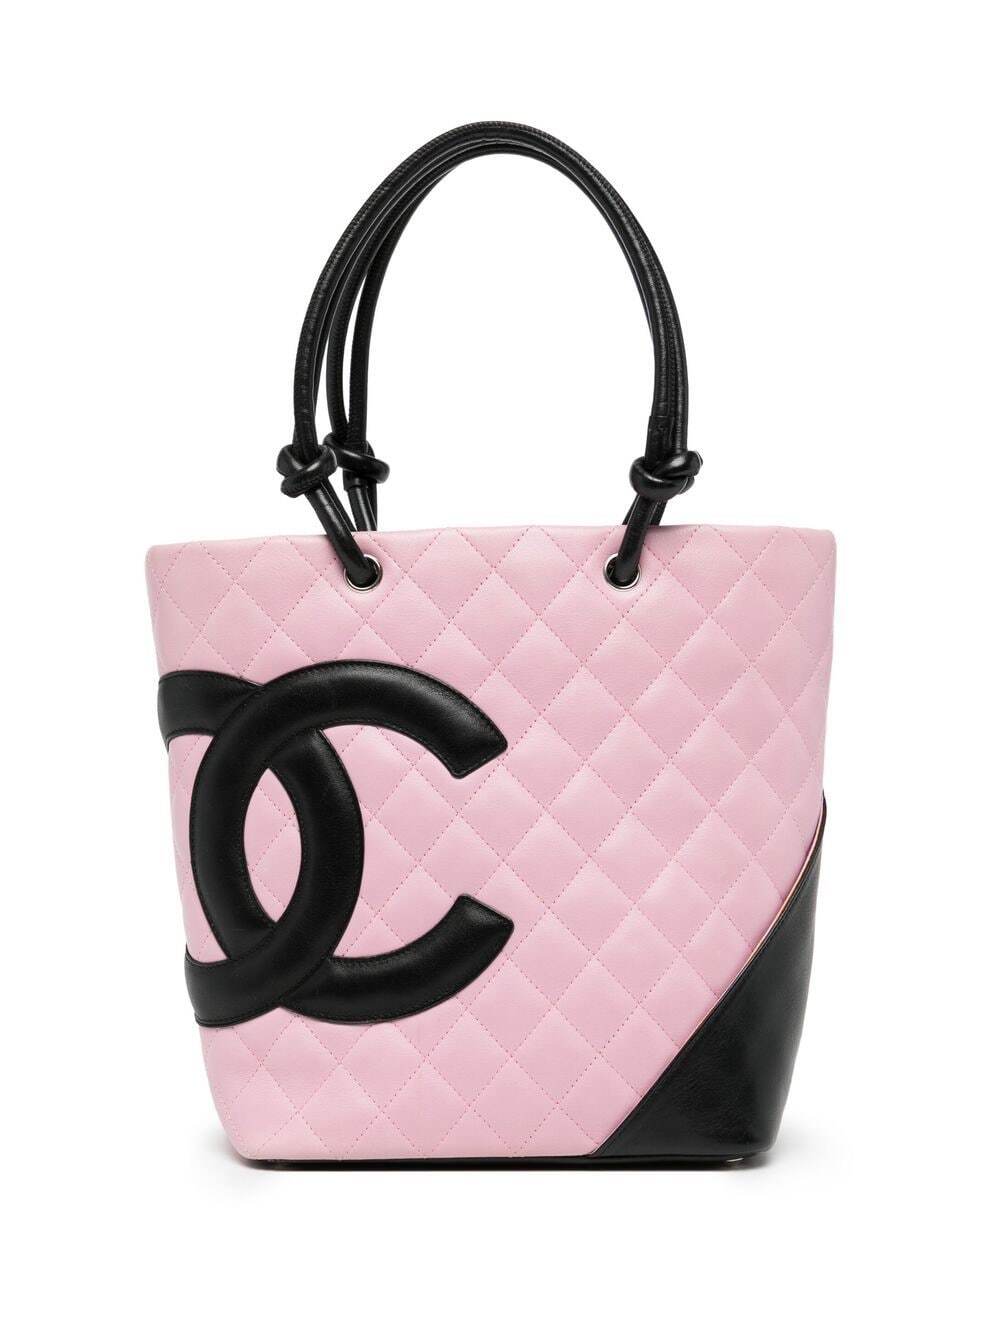 Chanel Pre-Owned 2005 Cambon diamond-quilted handbag - Pink